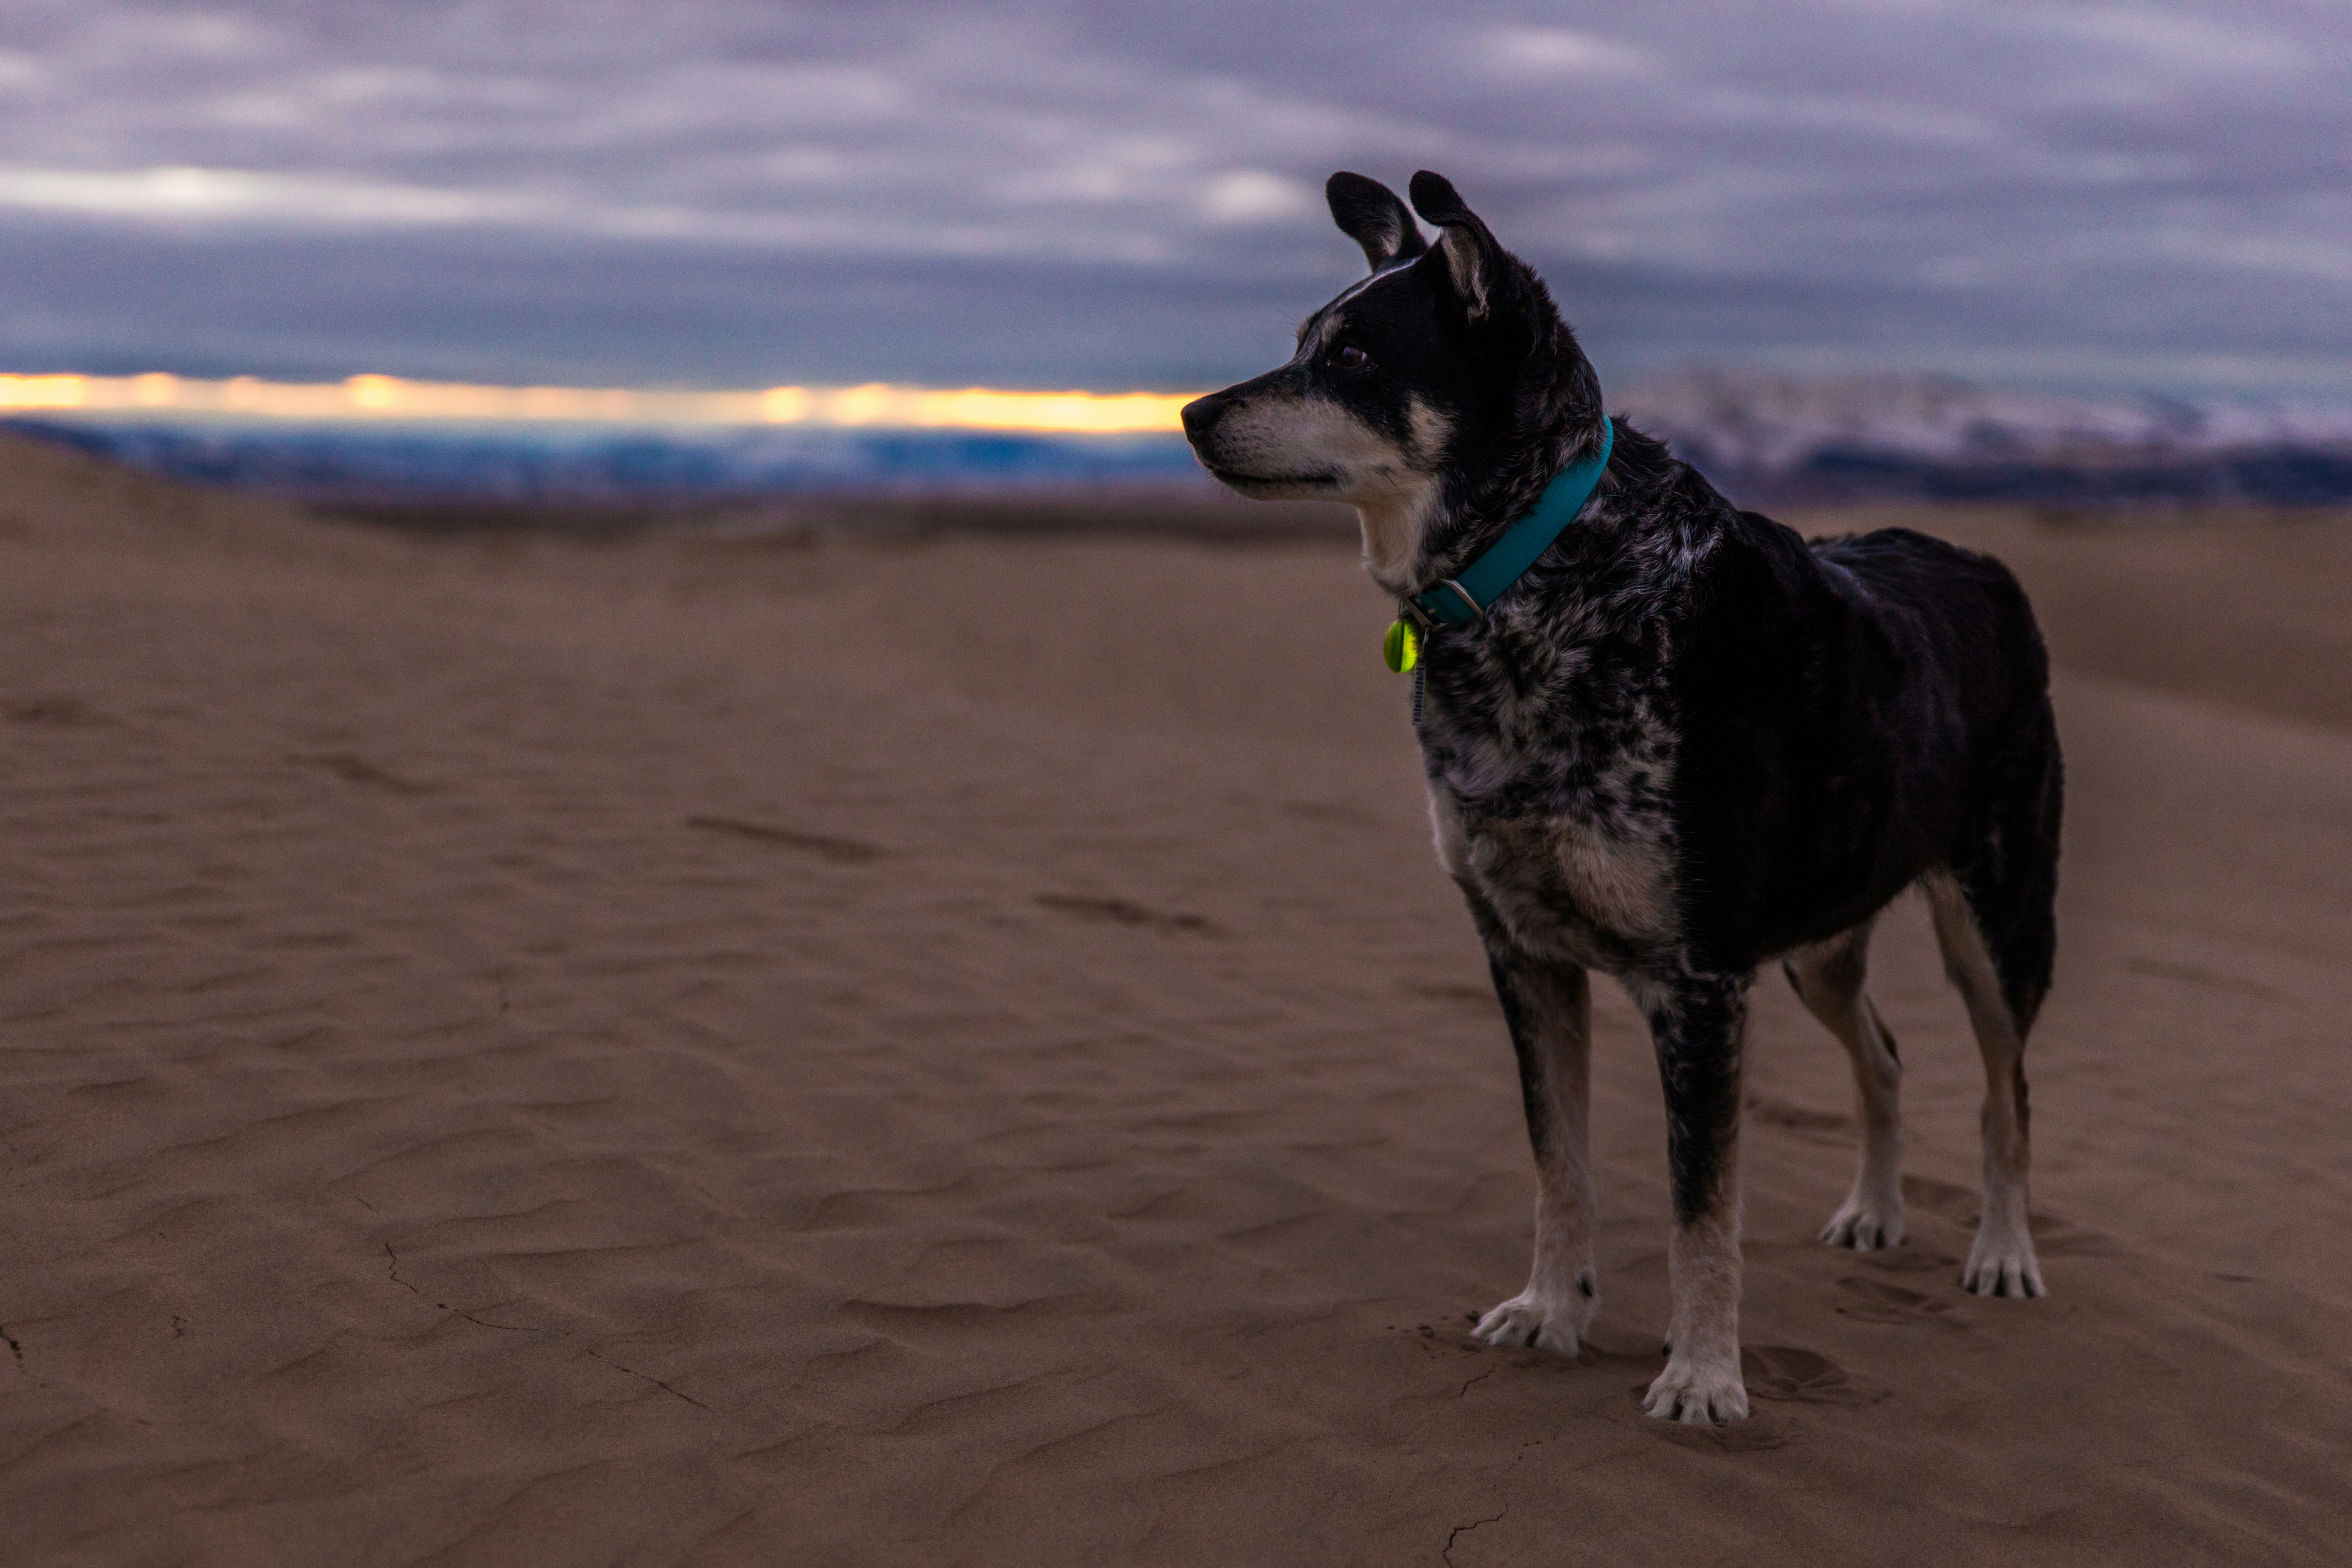 selective focus photo of short-coated black and brown dog on desert under cloudy sky at daytime